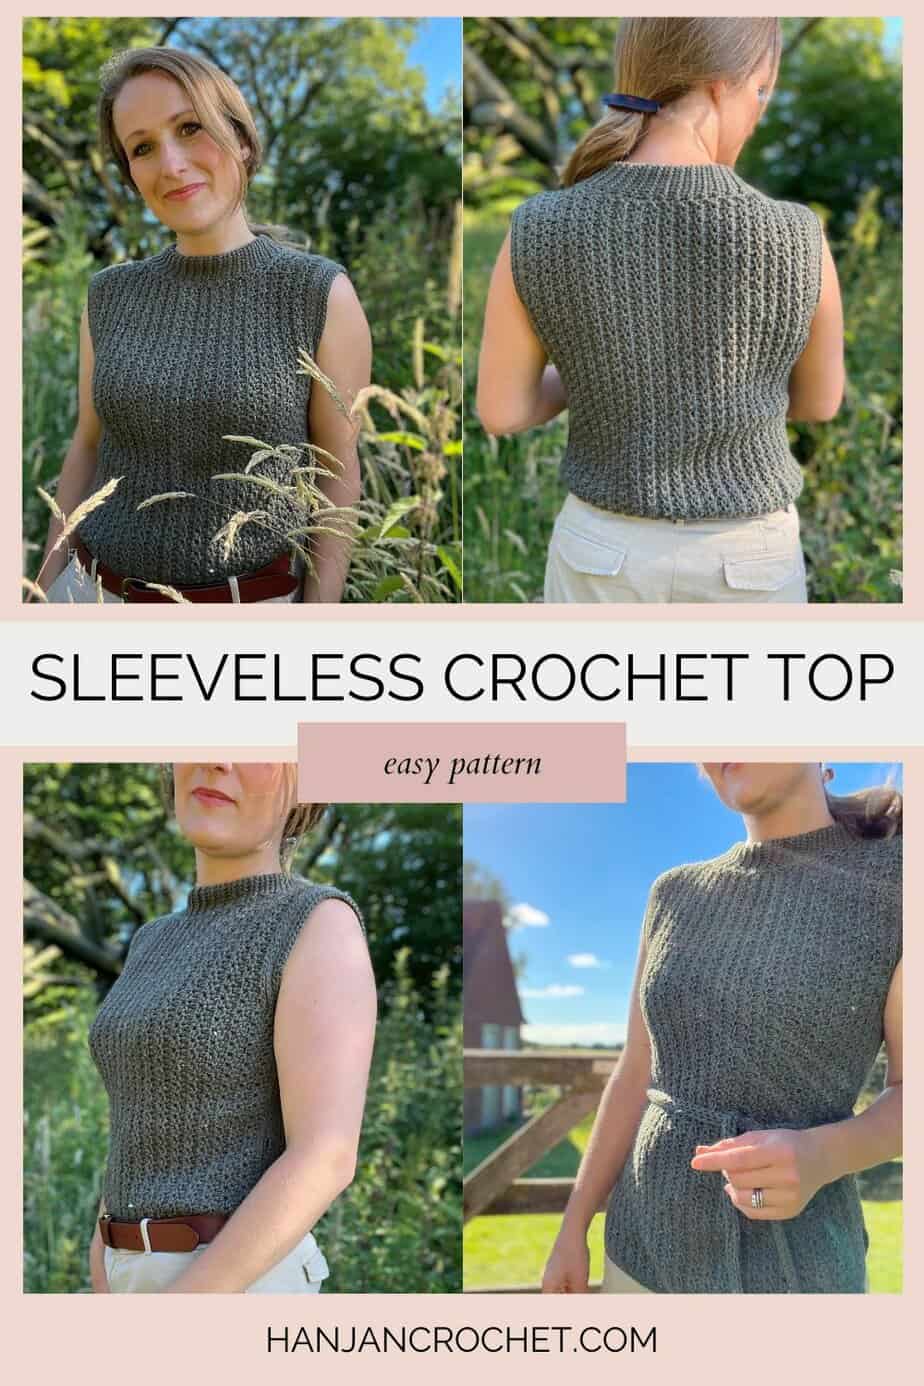 Four images of woman wearing tight fitting sleeveless crochet top pattern.